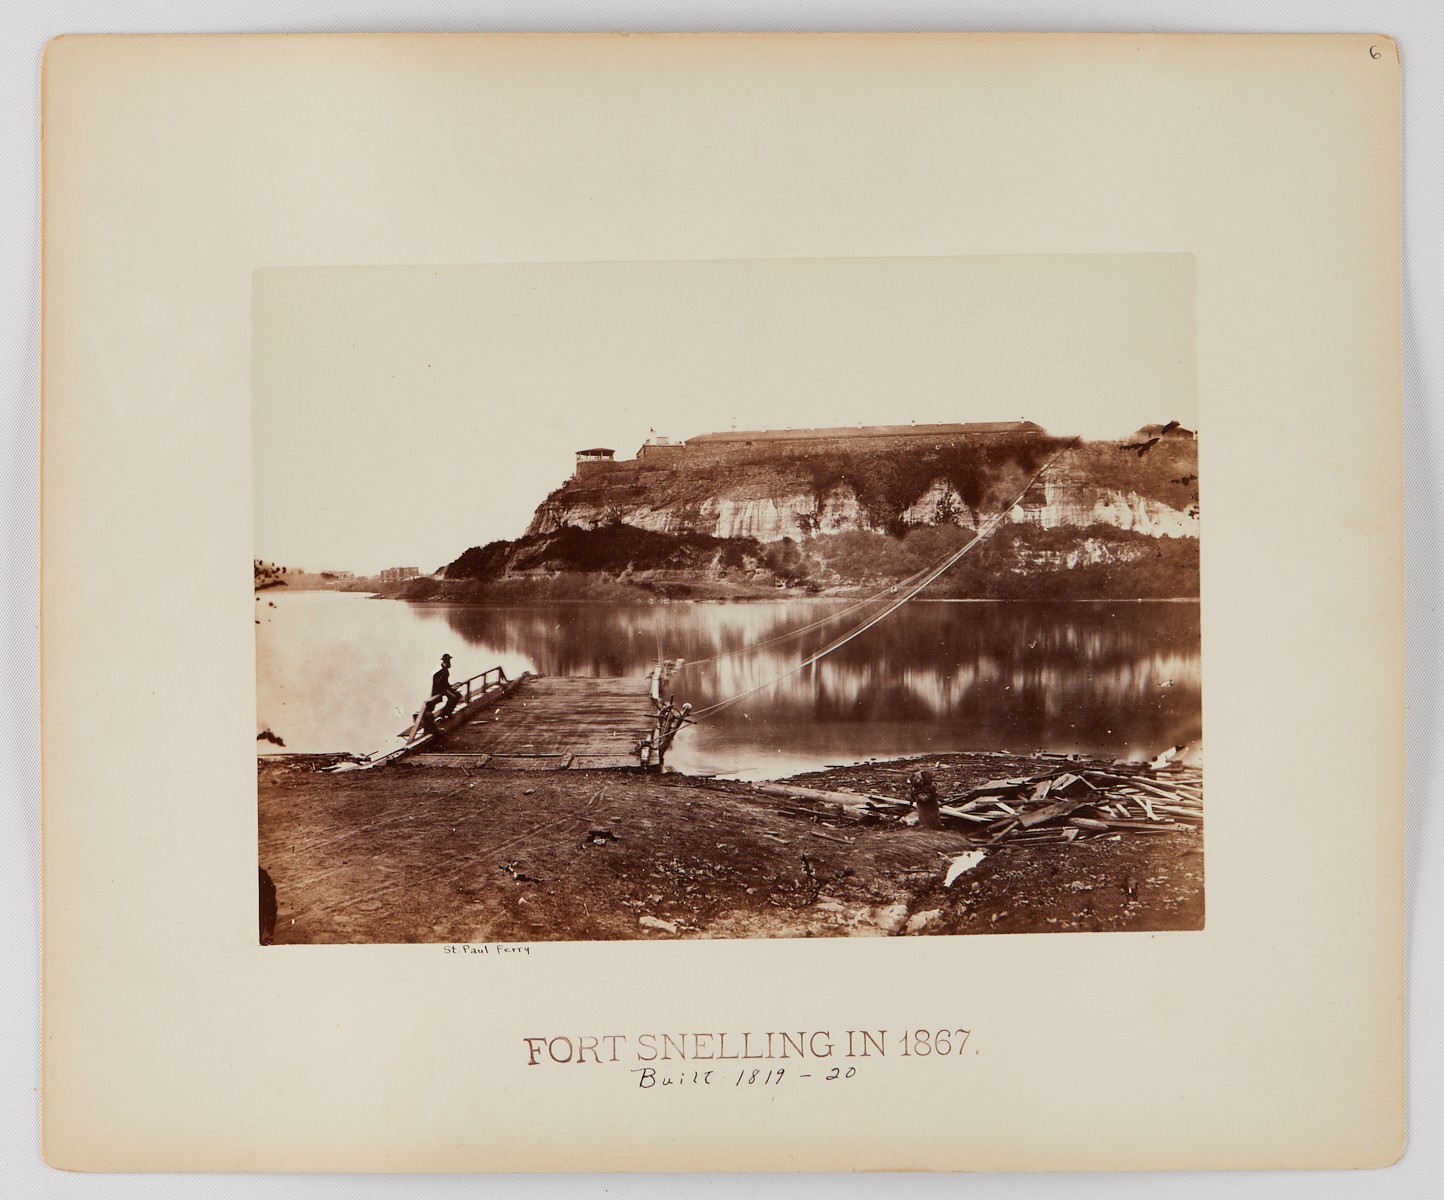 Benjamin Upton Fort Snelling 1867 Photograph - Image 2 of 5